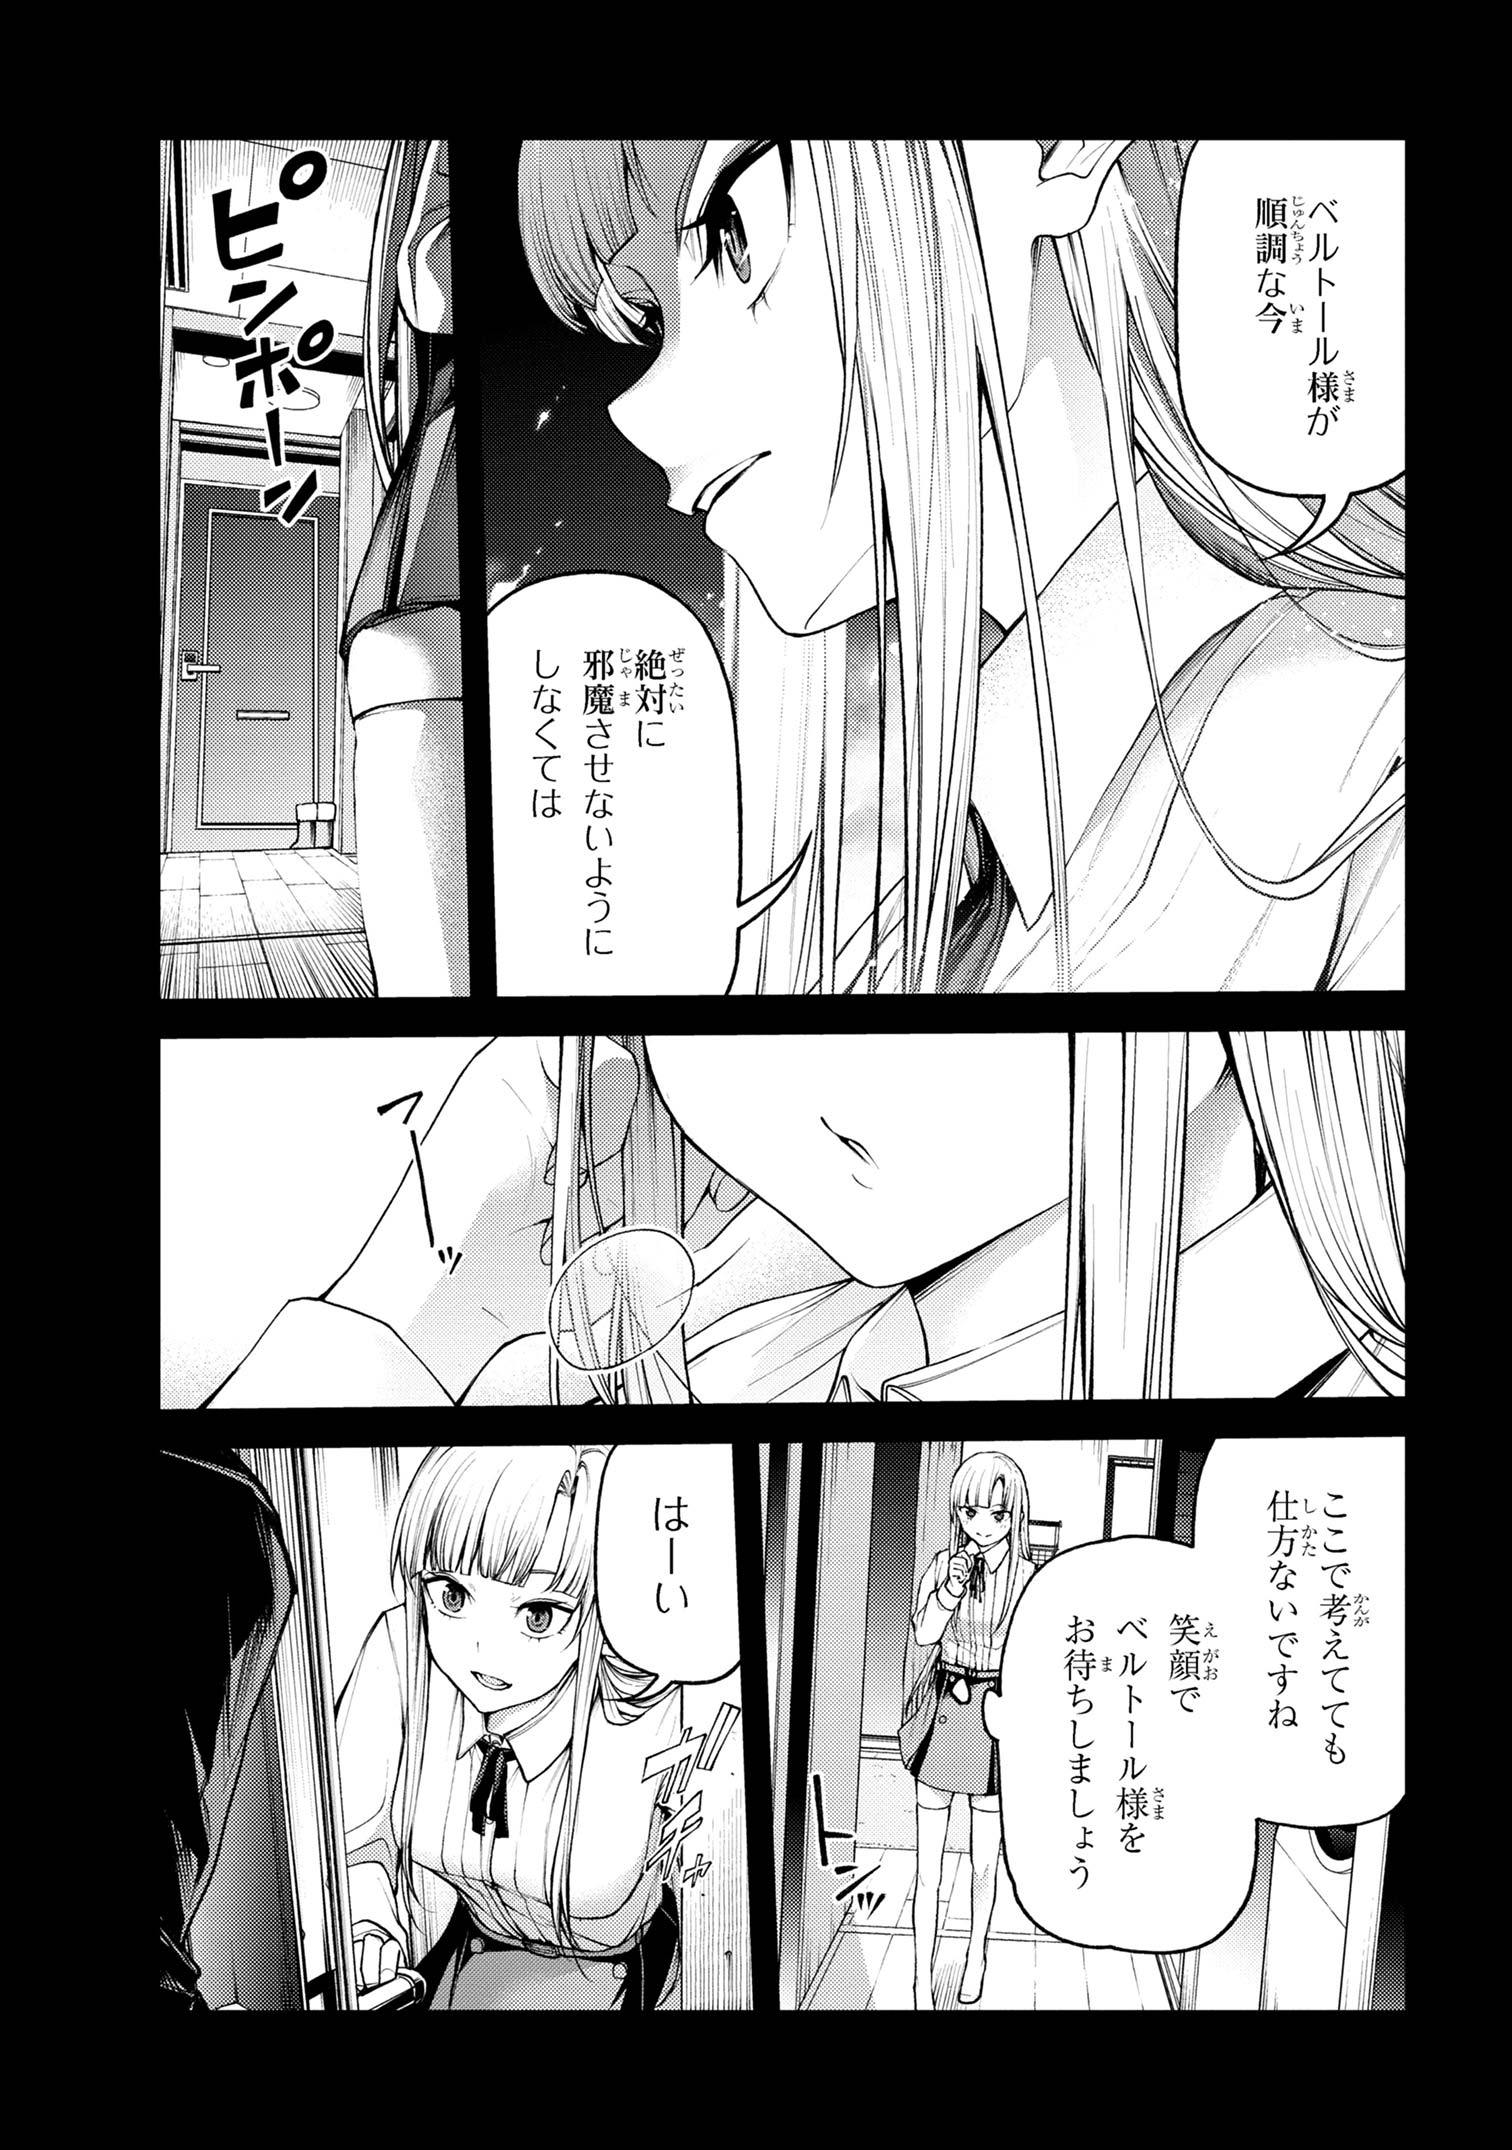 Maou 2099 - Chapter 8.1 - Page 5